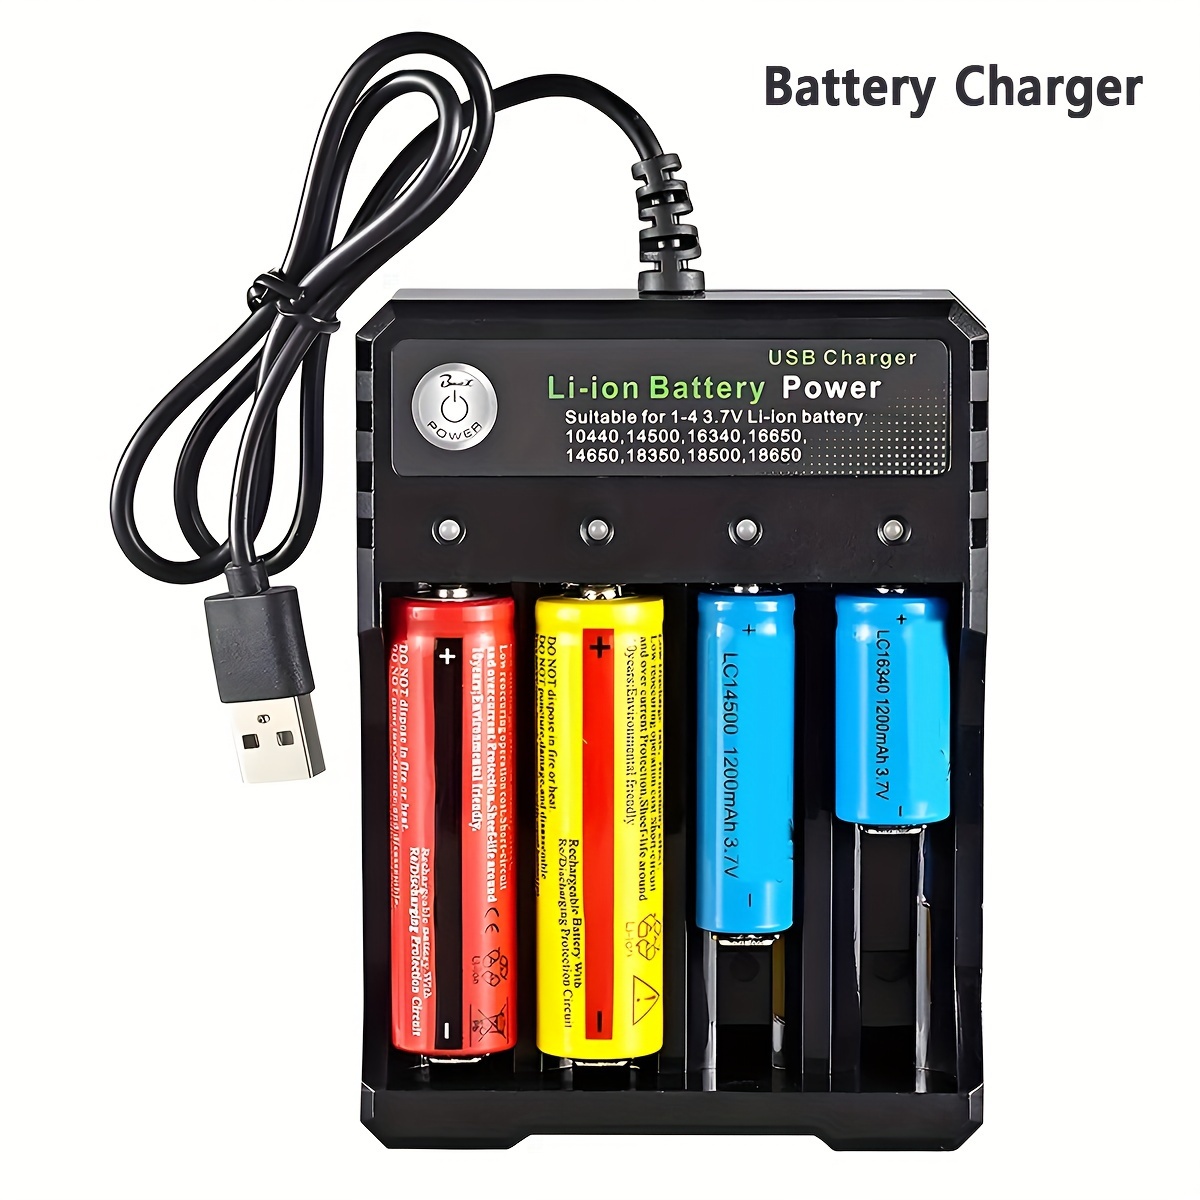 18650 li-ion Battery Charger, Suitable for 3.7v Battery 20700 10440 14500  18500 16340 17500 18650 Charger Charger, USB Single Slot Battery Charger